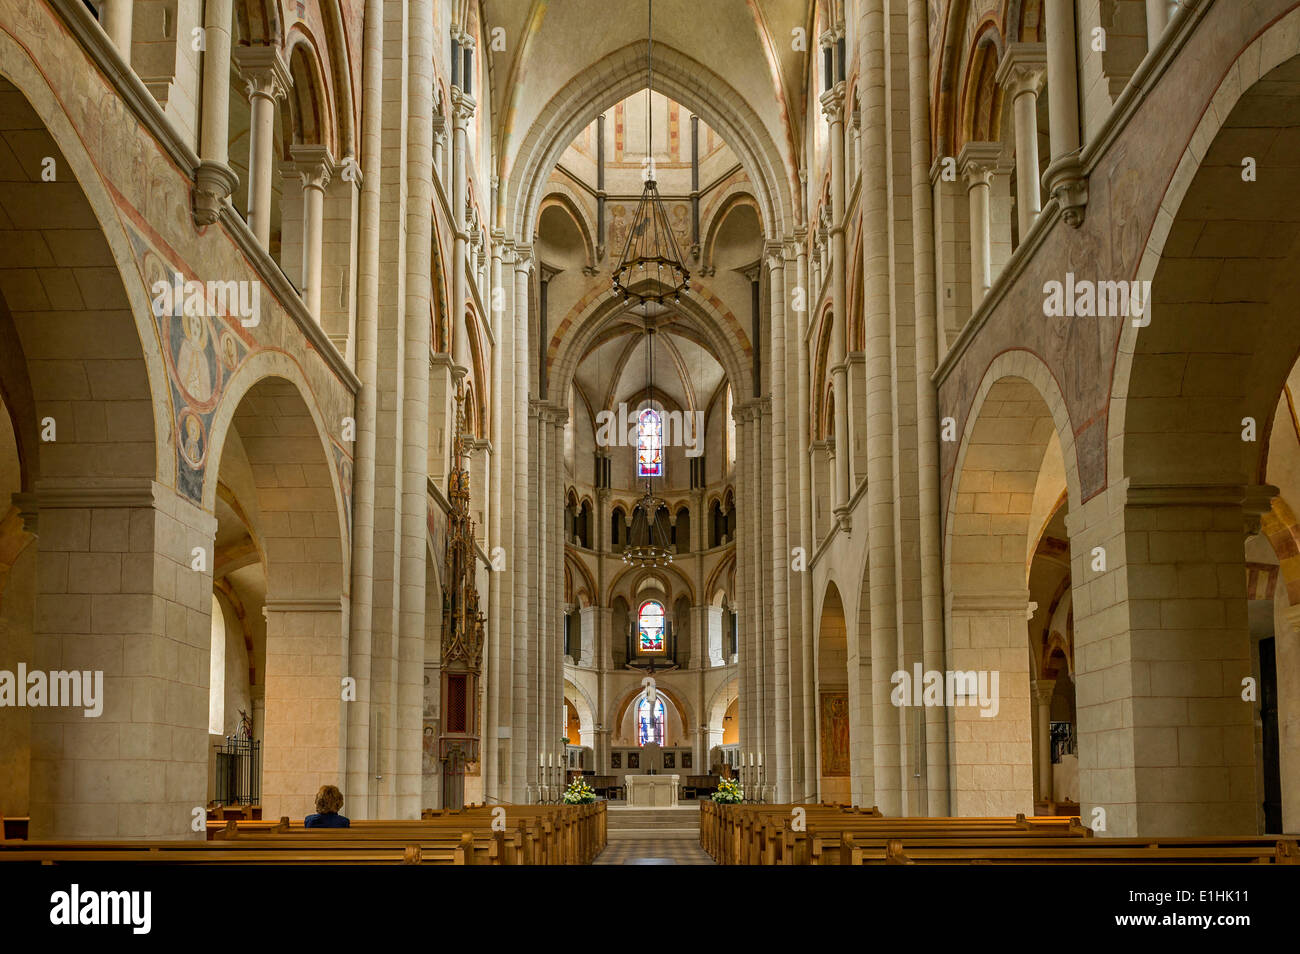 Nave of the Late Romanesque cathedral of St. George or Limburg Cathedral, Limburg an der Lahn, Hesse, Germany Stock Photo